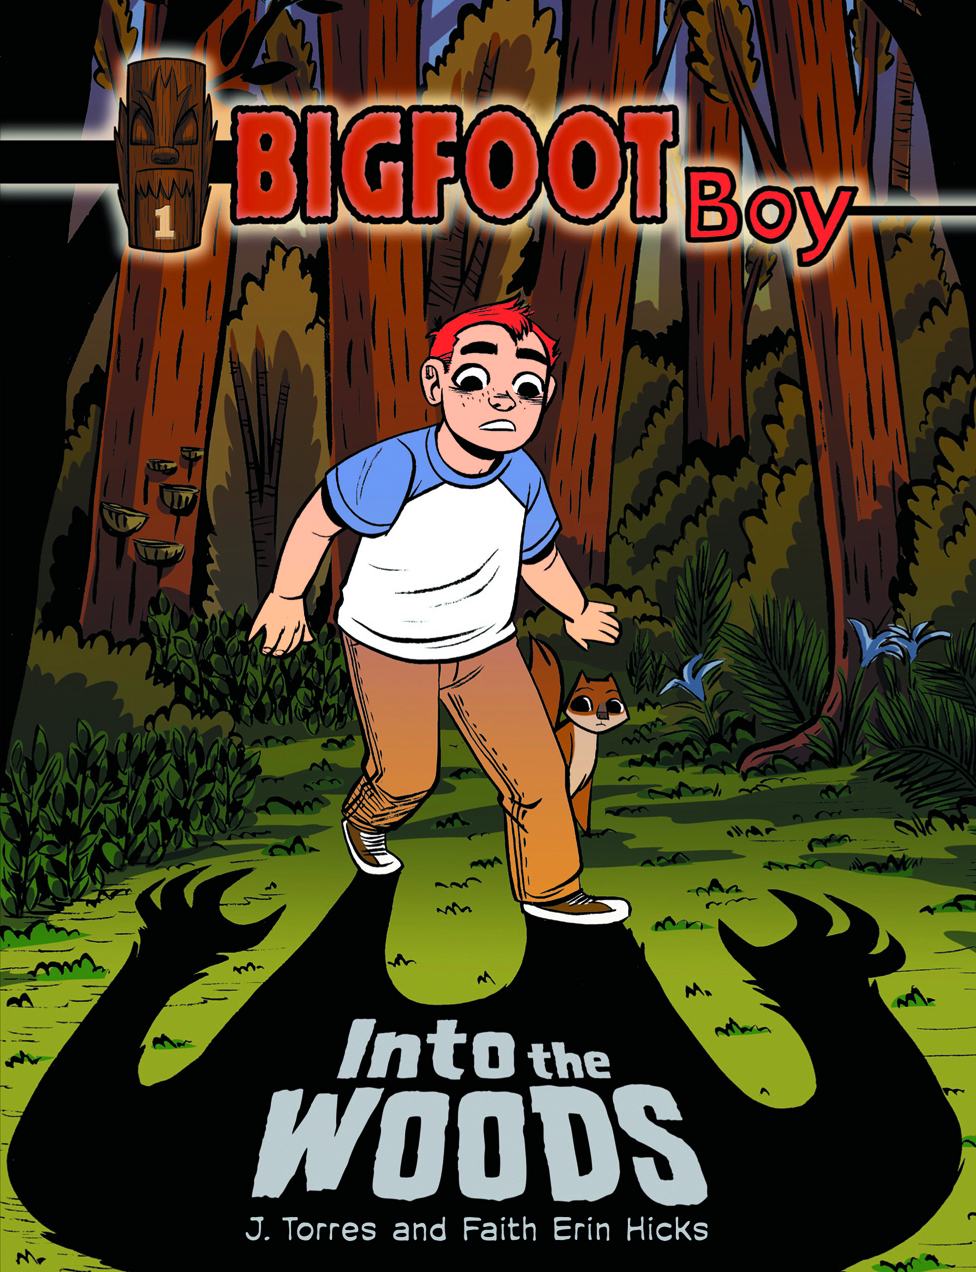 BIGFOOT BOY GN VOL 01 INTO THE WOODS